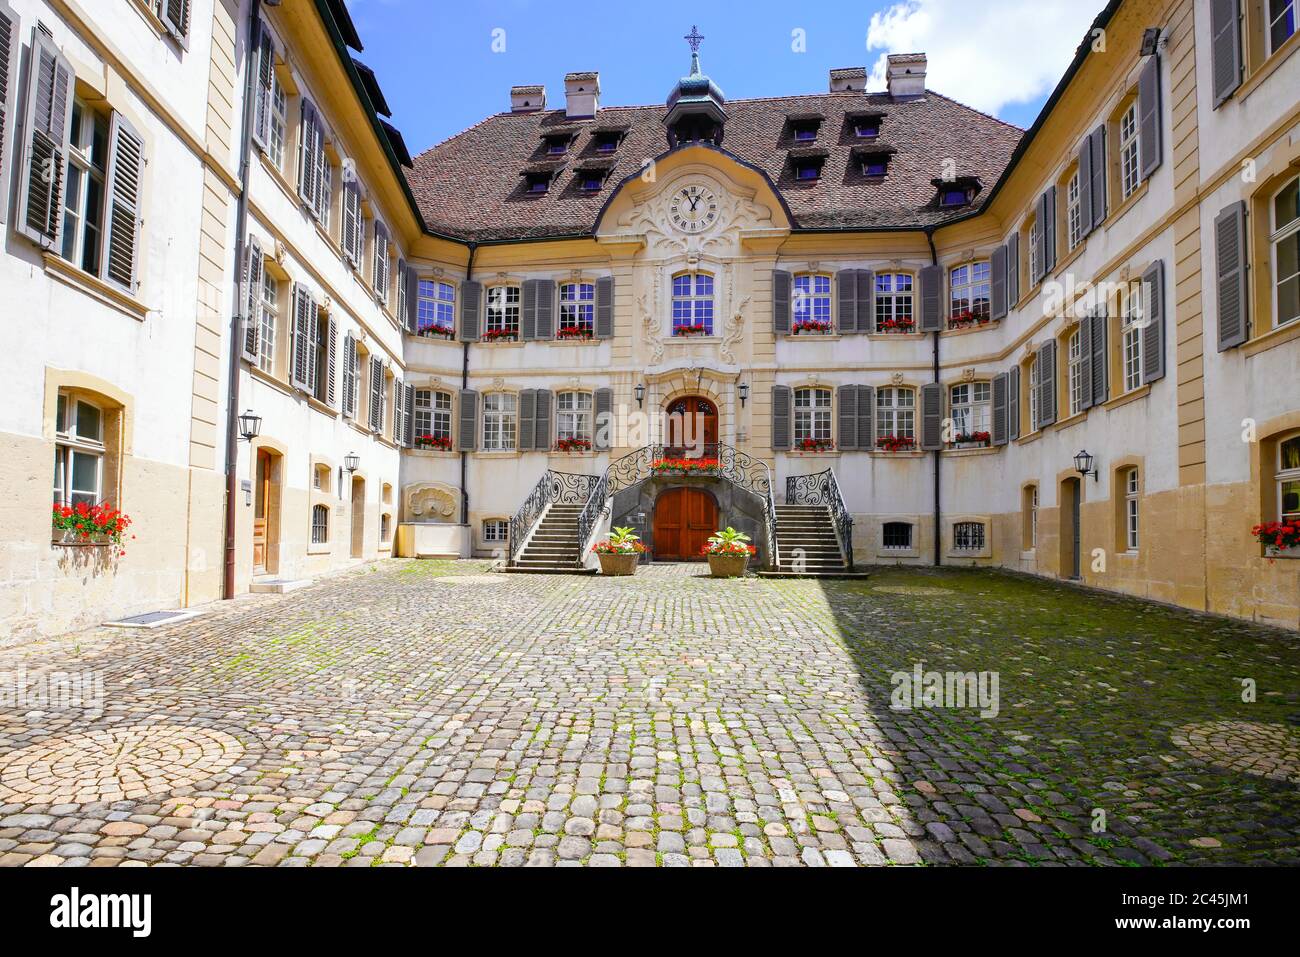 Hotel-Dieu (hospital) build 1761, now a museum and library, Porrentruy, canton Jura, Switzerland. Stock Photo